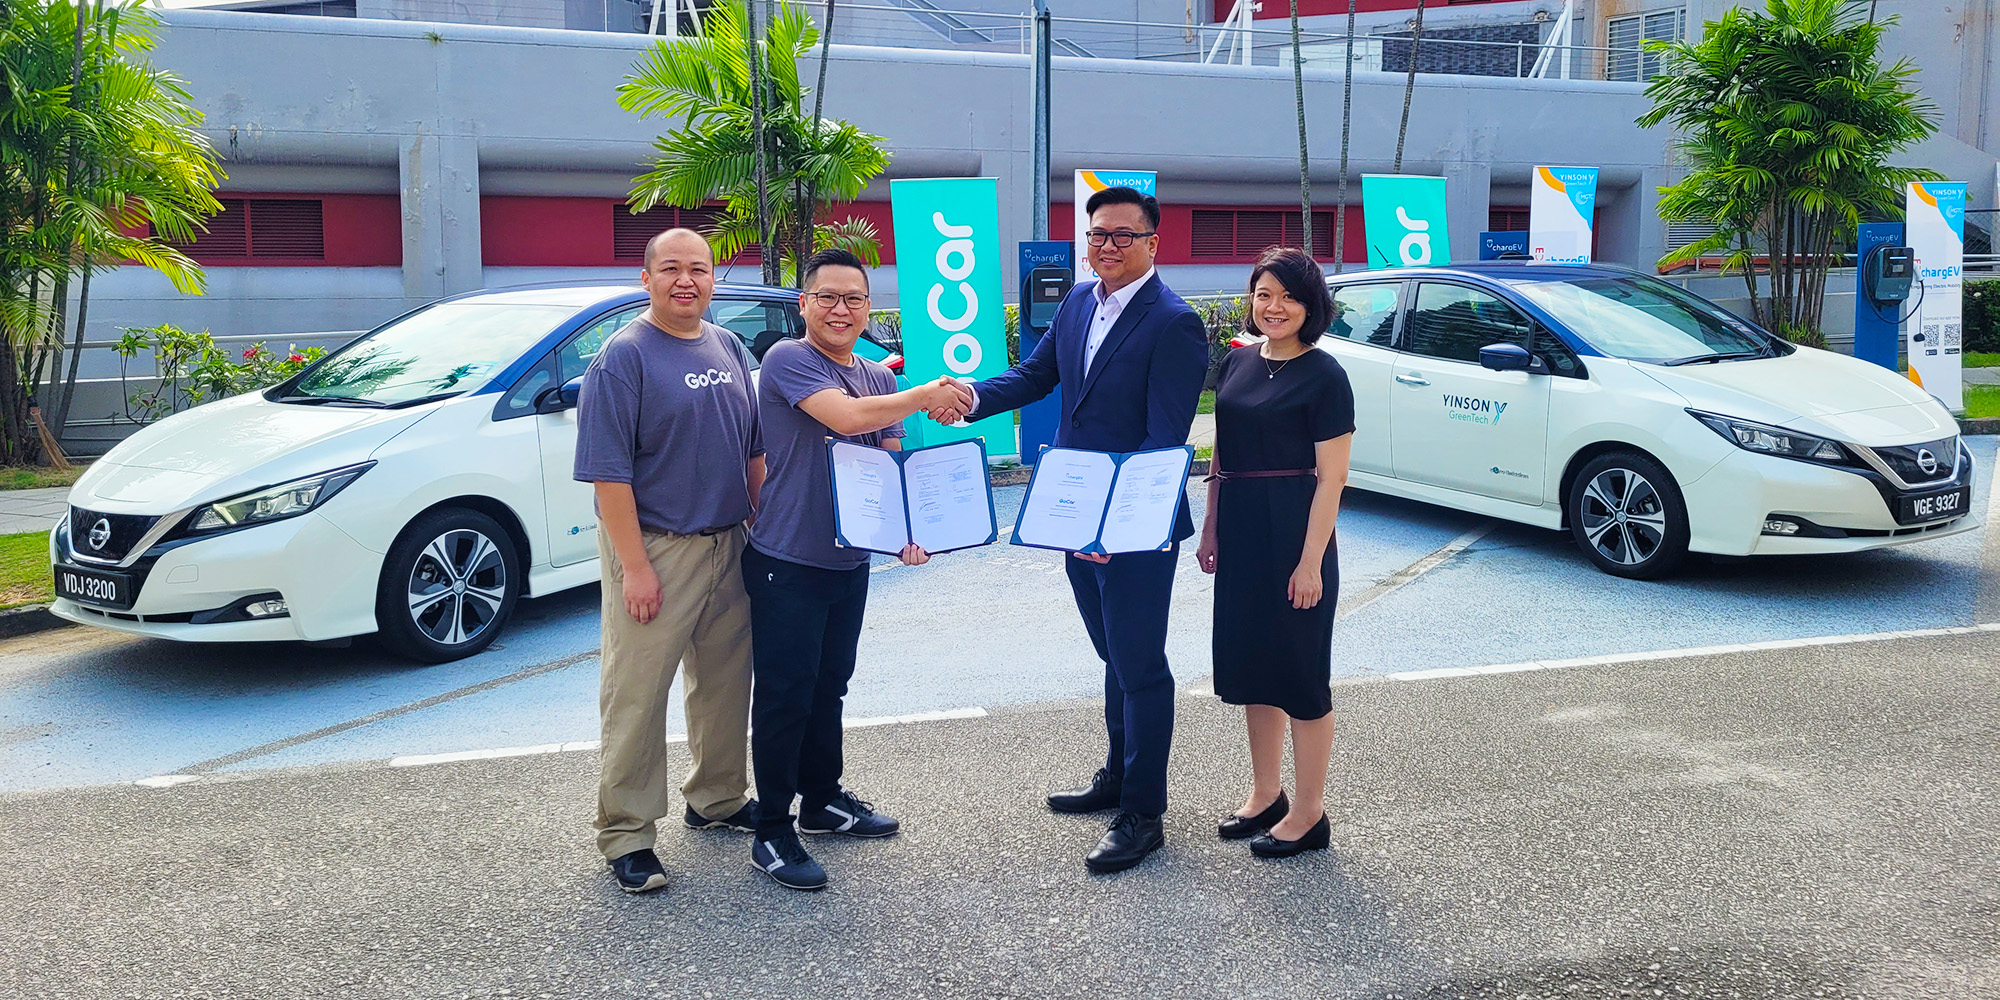 From left to right: Chang Choon Sai (GoCar Malaysia co-founder & chief technology officer), Wong Hoe Mun (GoCar Malaysia CEO), Ruslin Tamsir (Yinson GreenTech senior vice president Electromobility) and Valerie Yap Wai Foong (YGT business development manager) at the MoU Signing Ceremony between Yinson Green Technologies and GoCar.